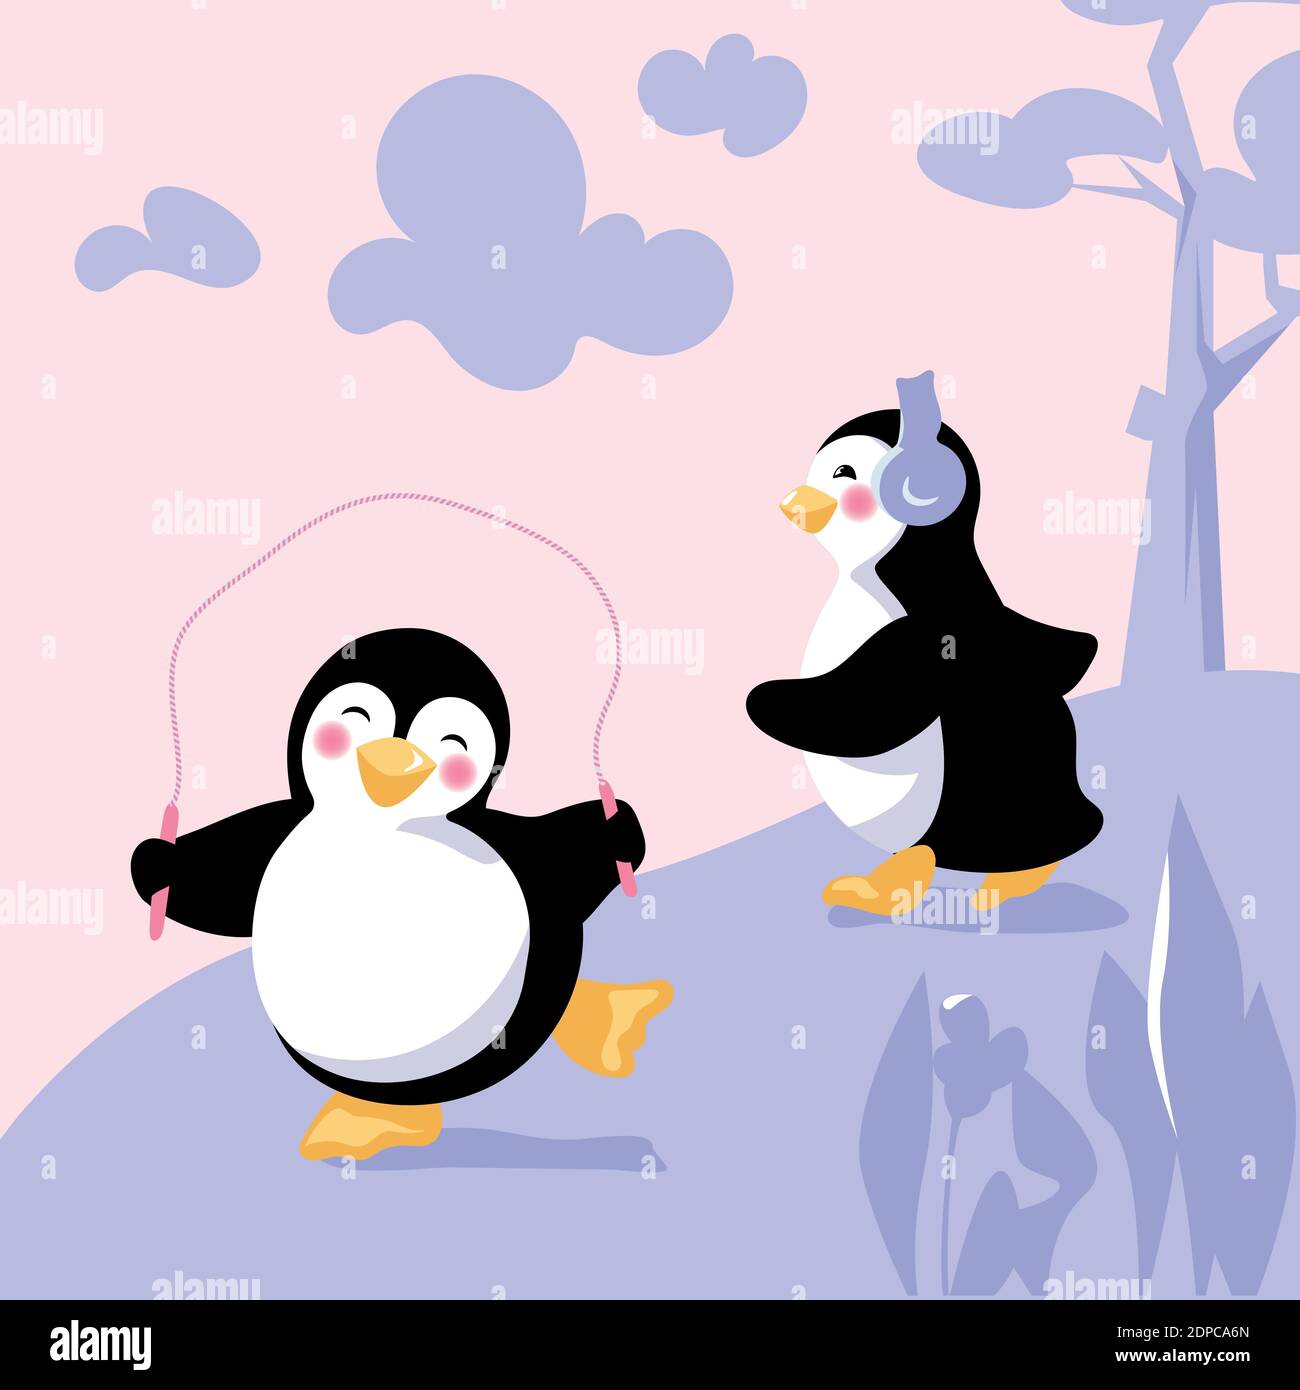 Friendly Penguins Have Hop Run Training Outdoors Stock Vector